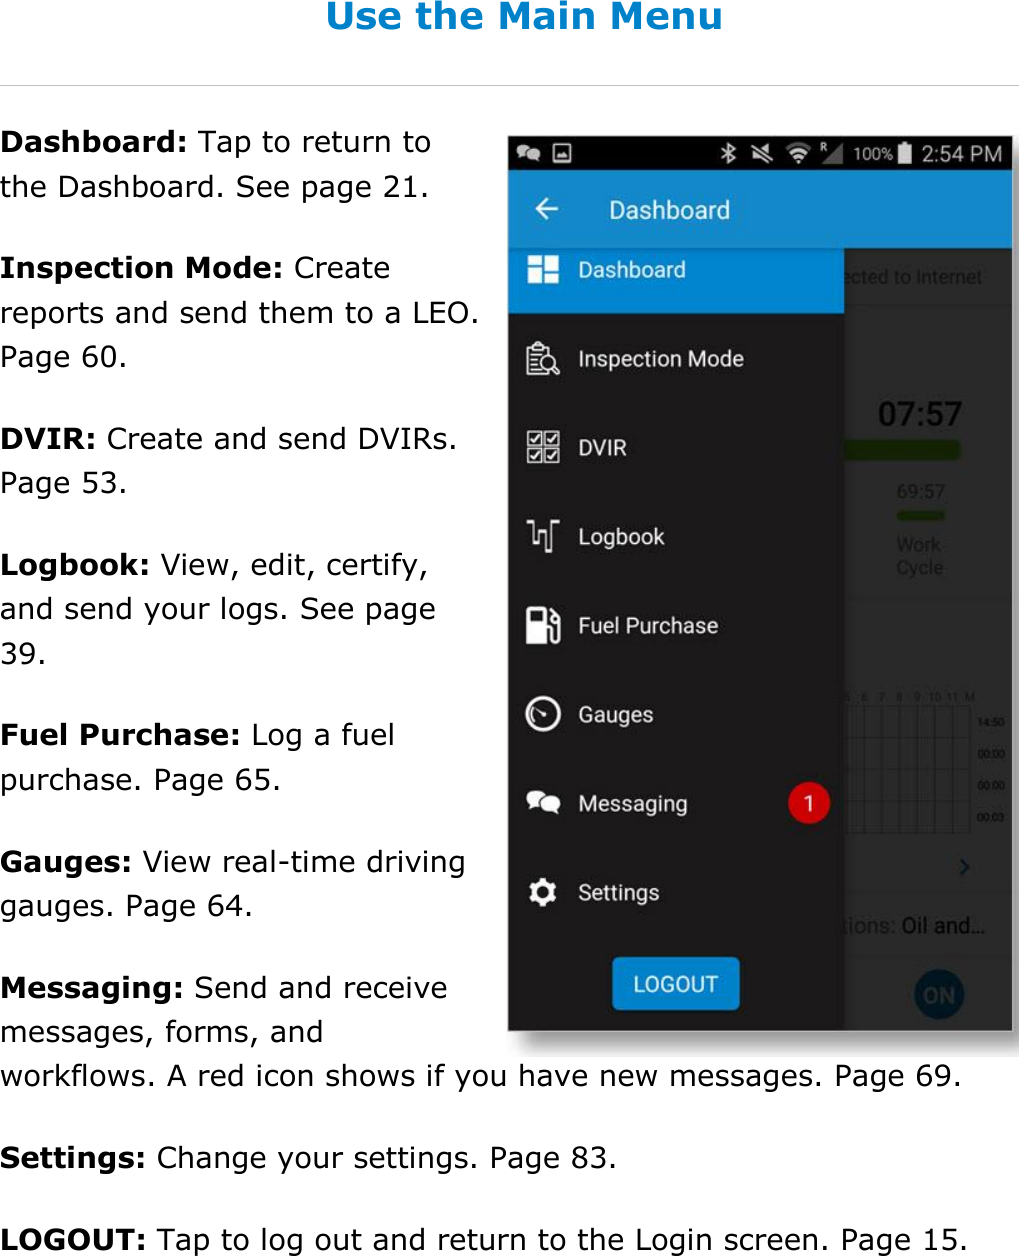 Set My Duty Status DriverConnect User Guide  26 © 2017, Rand McNally, Inc. Use the Main Menu Dashboard: Tap to return to the Dashboard. See page 21. Inspection Mode: Create reports and send them to a LEO. Page 60. DVIR: Create and send DVIRs. Page 53. Logbook: View, edit, certify, and send your logs. See page 39. Fuel Purchase: Log a fuel purchase. Page 65. Gauges: View real-time driving gauges. Page 64. Messaging: Send and receive messages, forms, and workflows. A red icon shows if you have new messages. Page 69. Settings: Change your settings. Page 83. LOGOUT: Tap to log out and return to the Login screen. Page 15.   